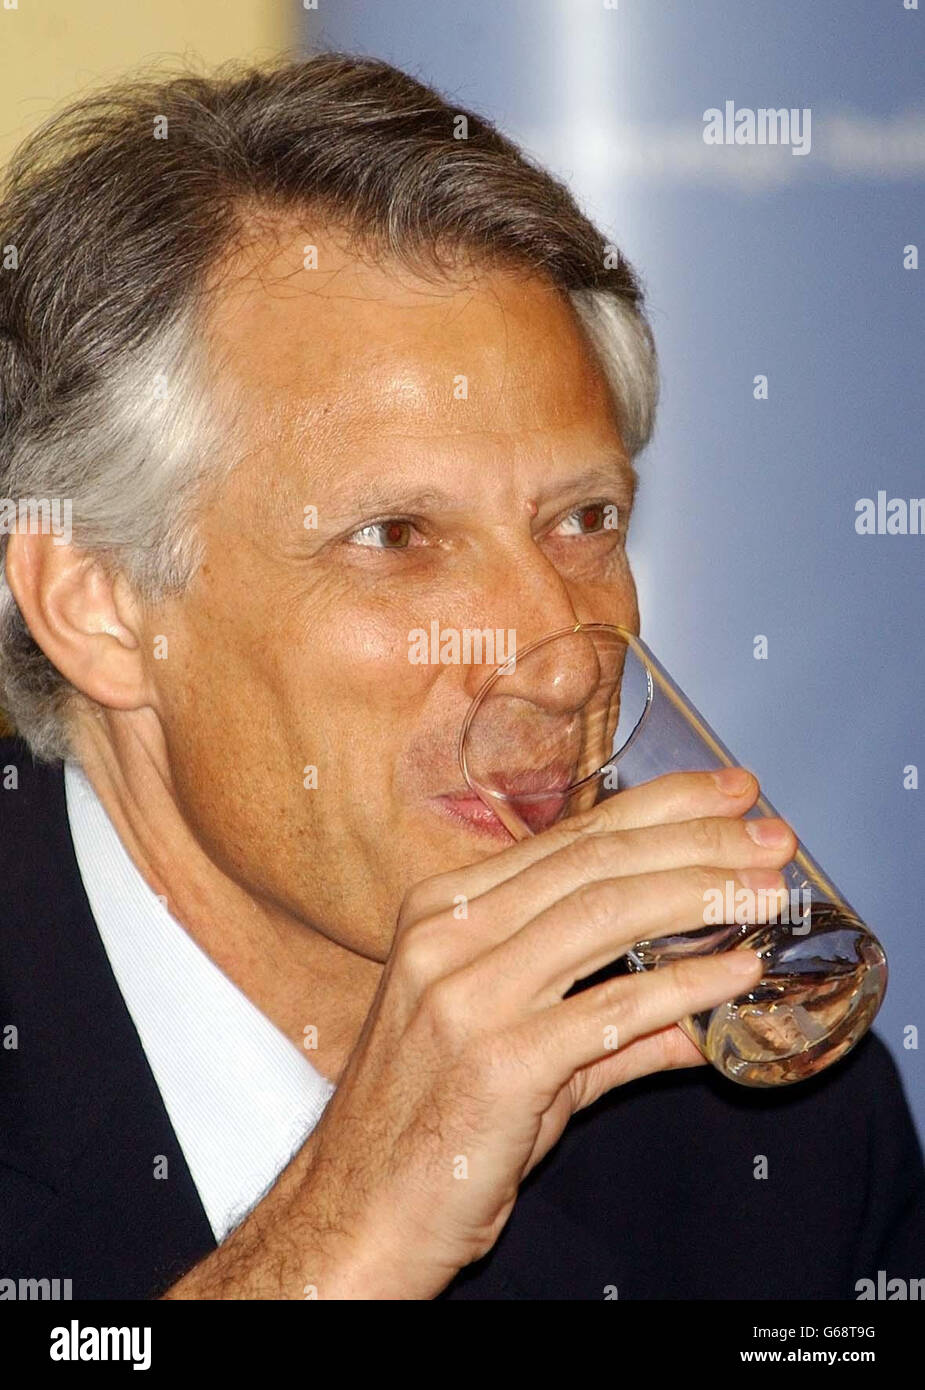 French Foreign Minister Dominique de Villepin sips a glass of water after giving the Alastair Buchan Memorial Lecture, at the International Institute for Strategic Studies in central London. He was visiting Britain for the first time since the outbreak of war in Iraq. * France has been fiercely opposed to the US and British-led military action against Saddam Hussein's regime. Stock Photo